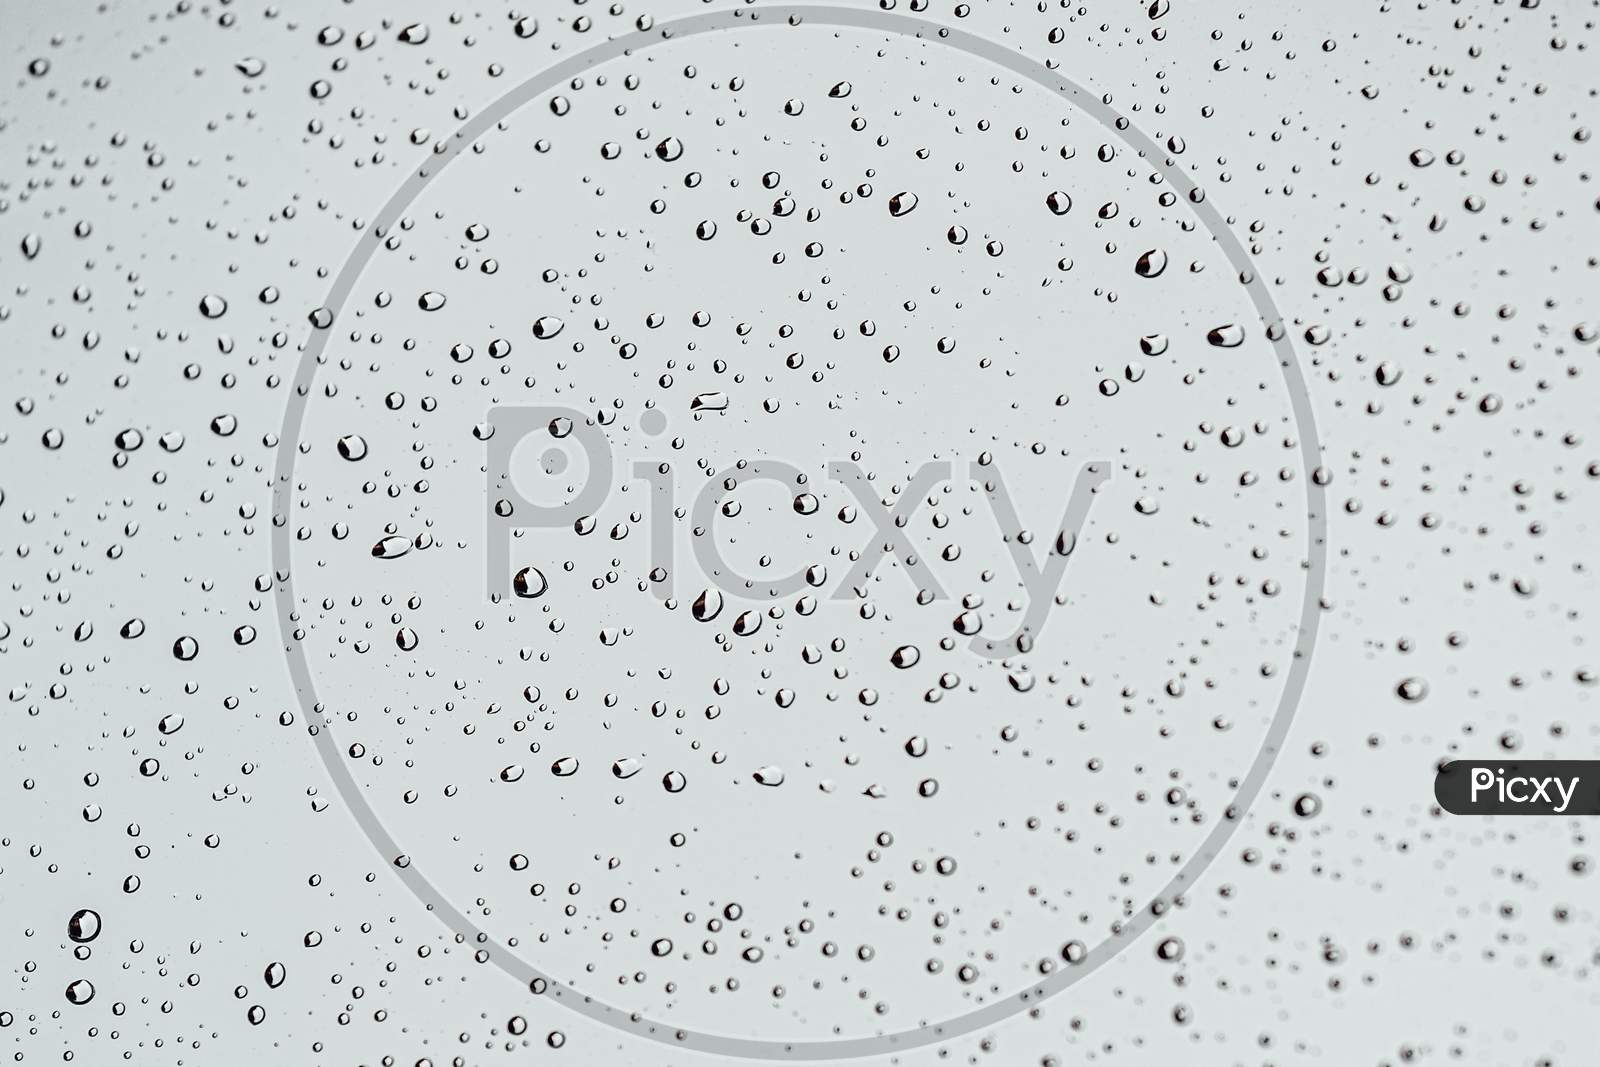 Super Minimalistic White Background Of Rain Drops Over A Crystal With Super Texture And Sharp Drops